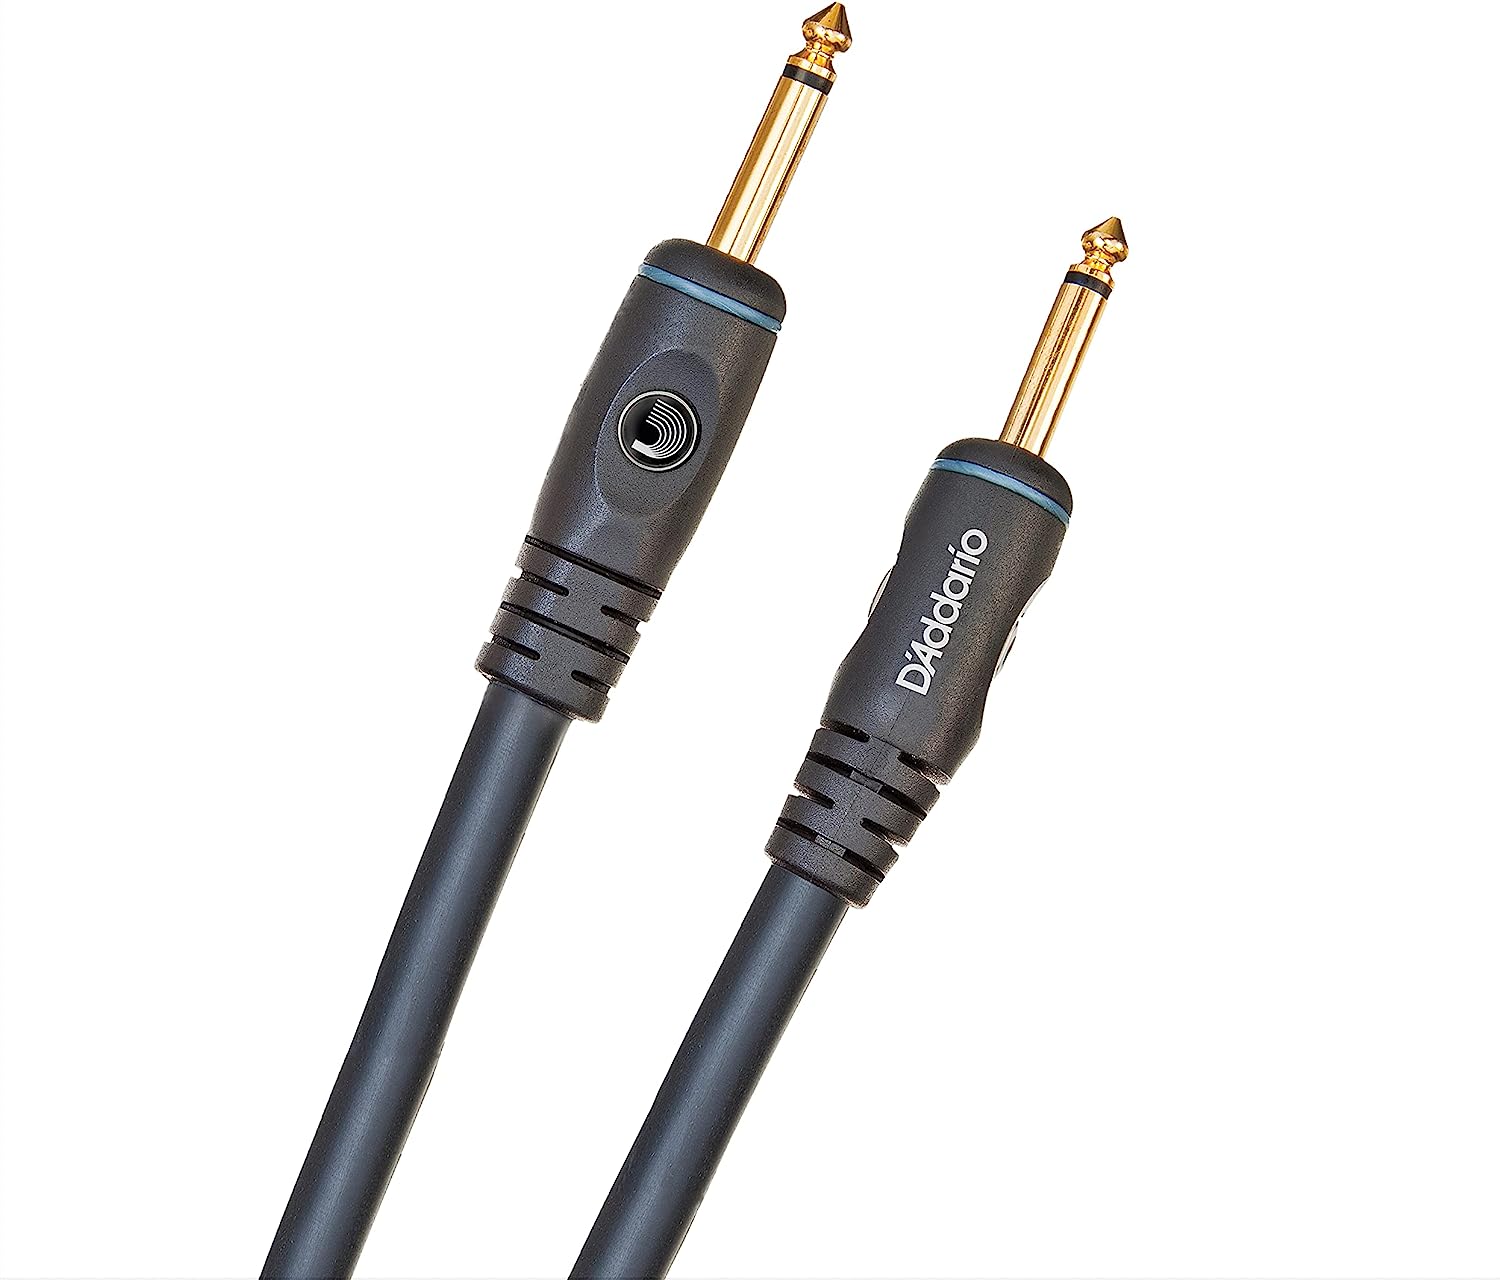 D'Addario Speaker Cable - Gold Plated Plugs for [...]